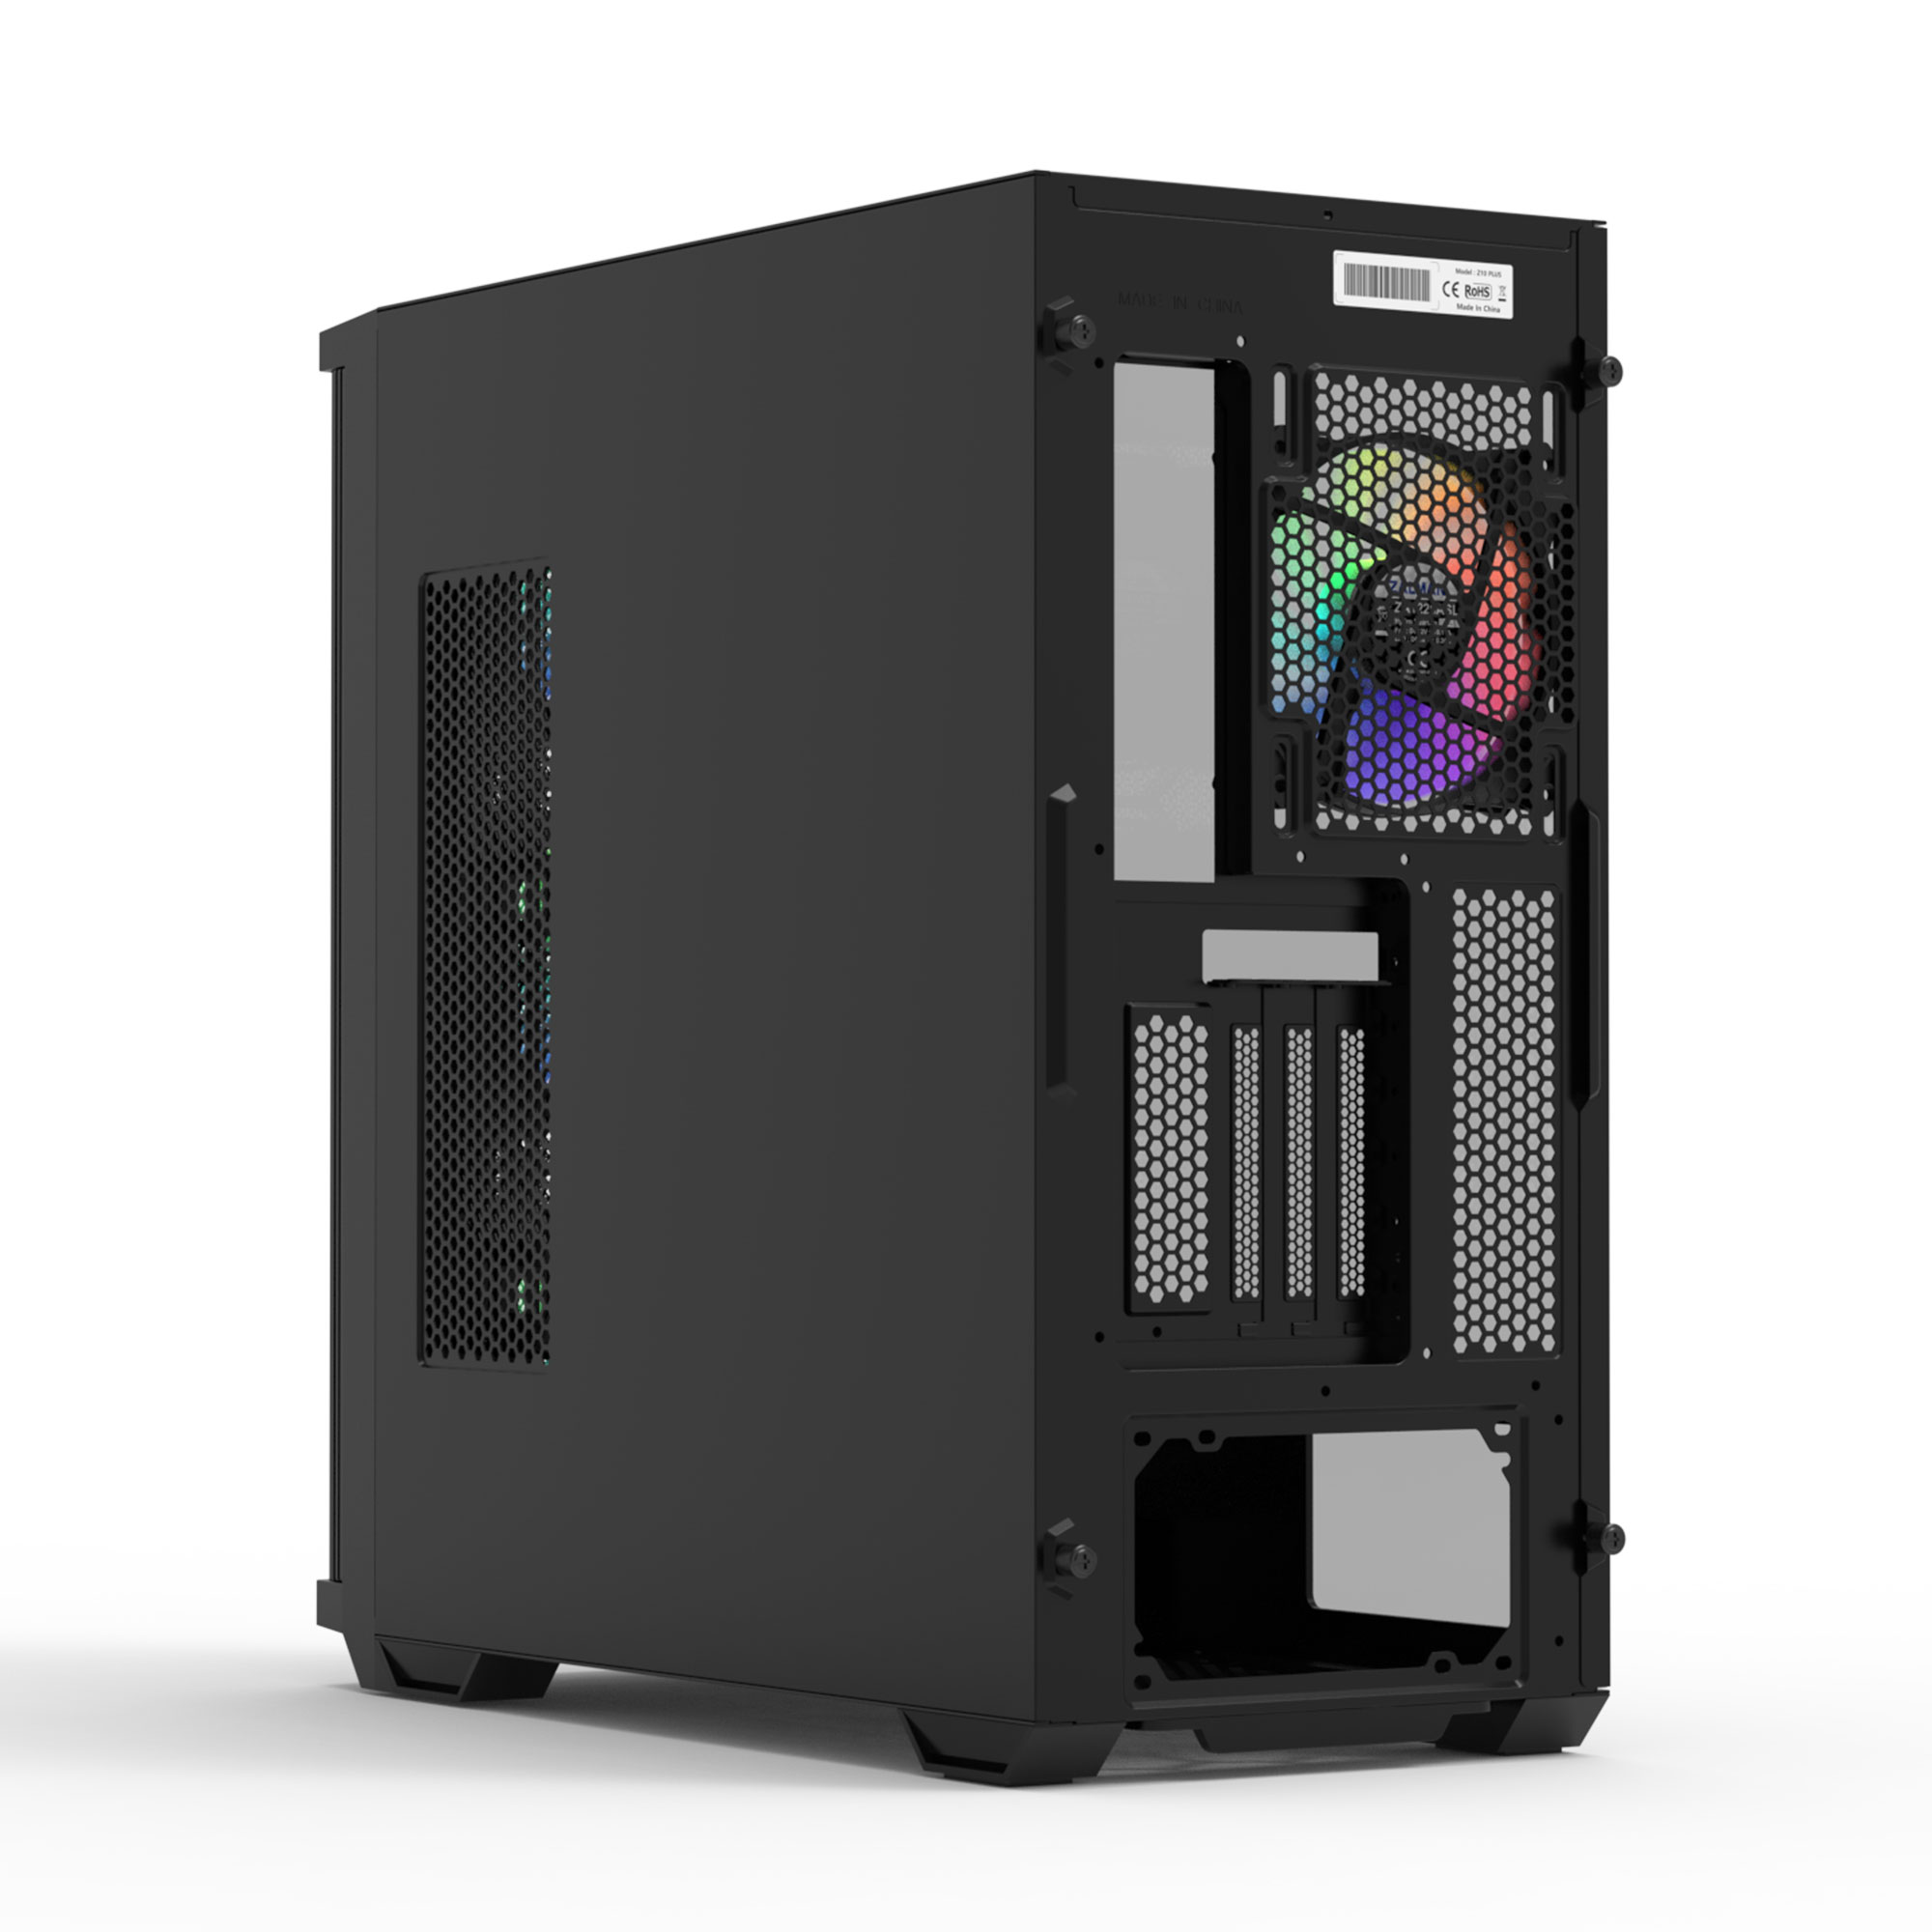 Zalman Z10 Duo - ATX Mid-Tower Case/ Pre-installed fan: 3x 120mm(Front), 1x 120mm(Rear)/ T/G Side Panel, Mesh and Glas Front Panel/ Dust Filter at Front/ 1x USB Type-C applied/ GPU Support Brace Included/ Dimension : 481 x 220 x 488 (H)mm